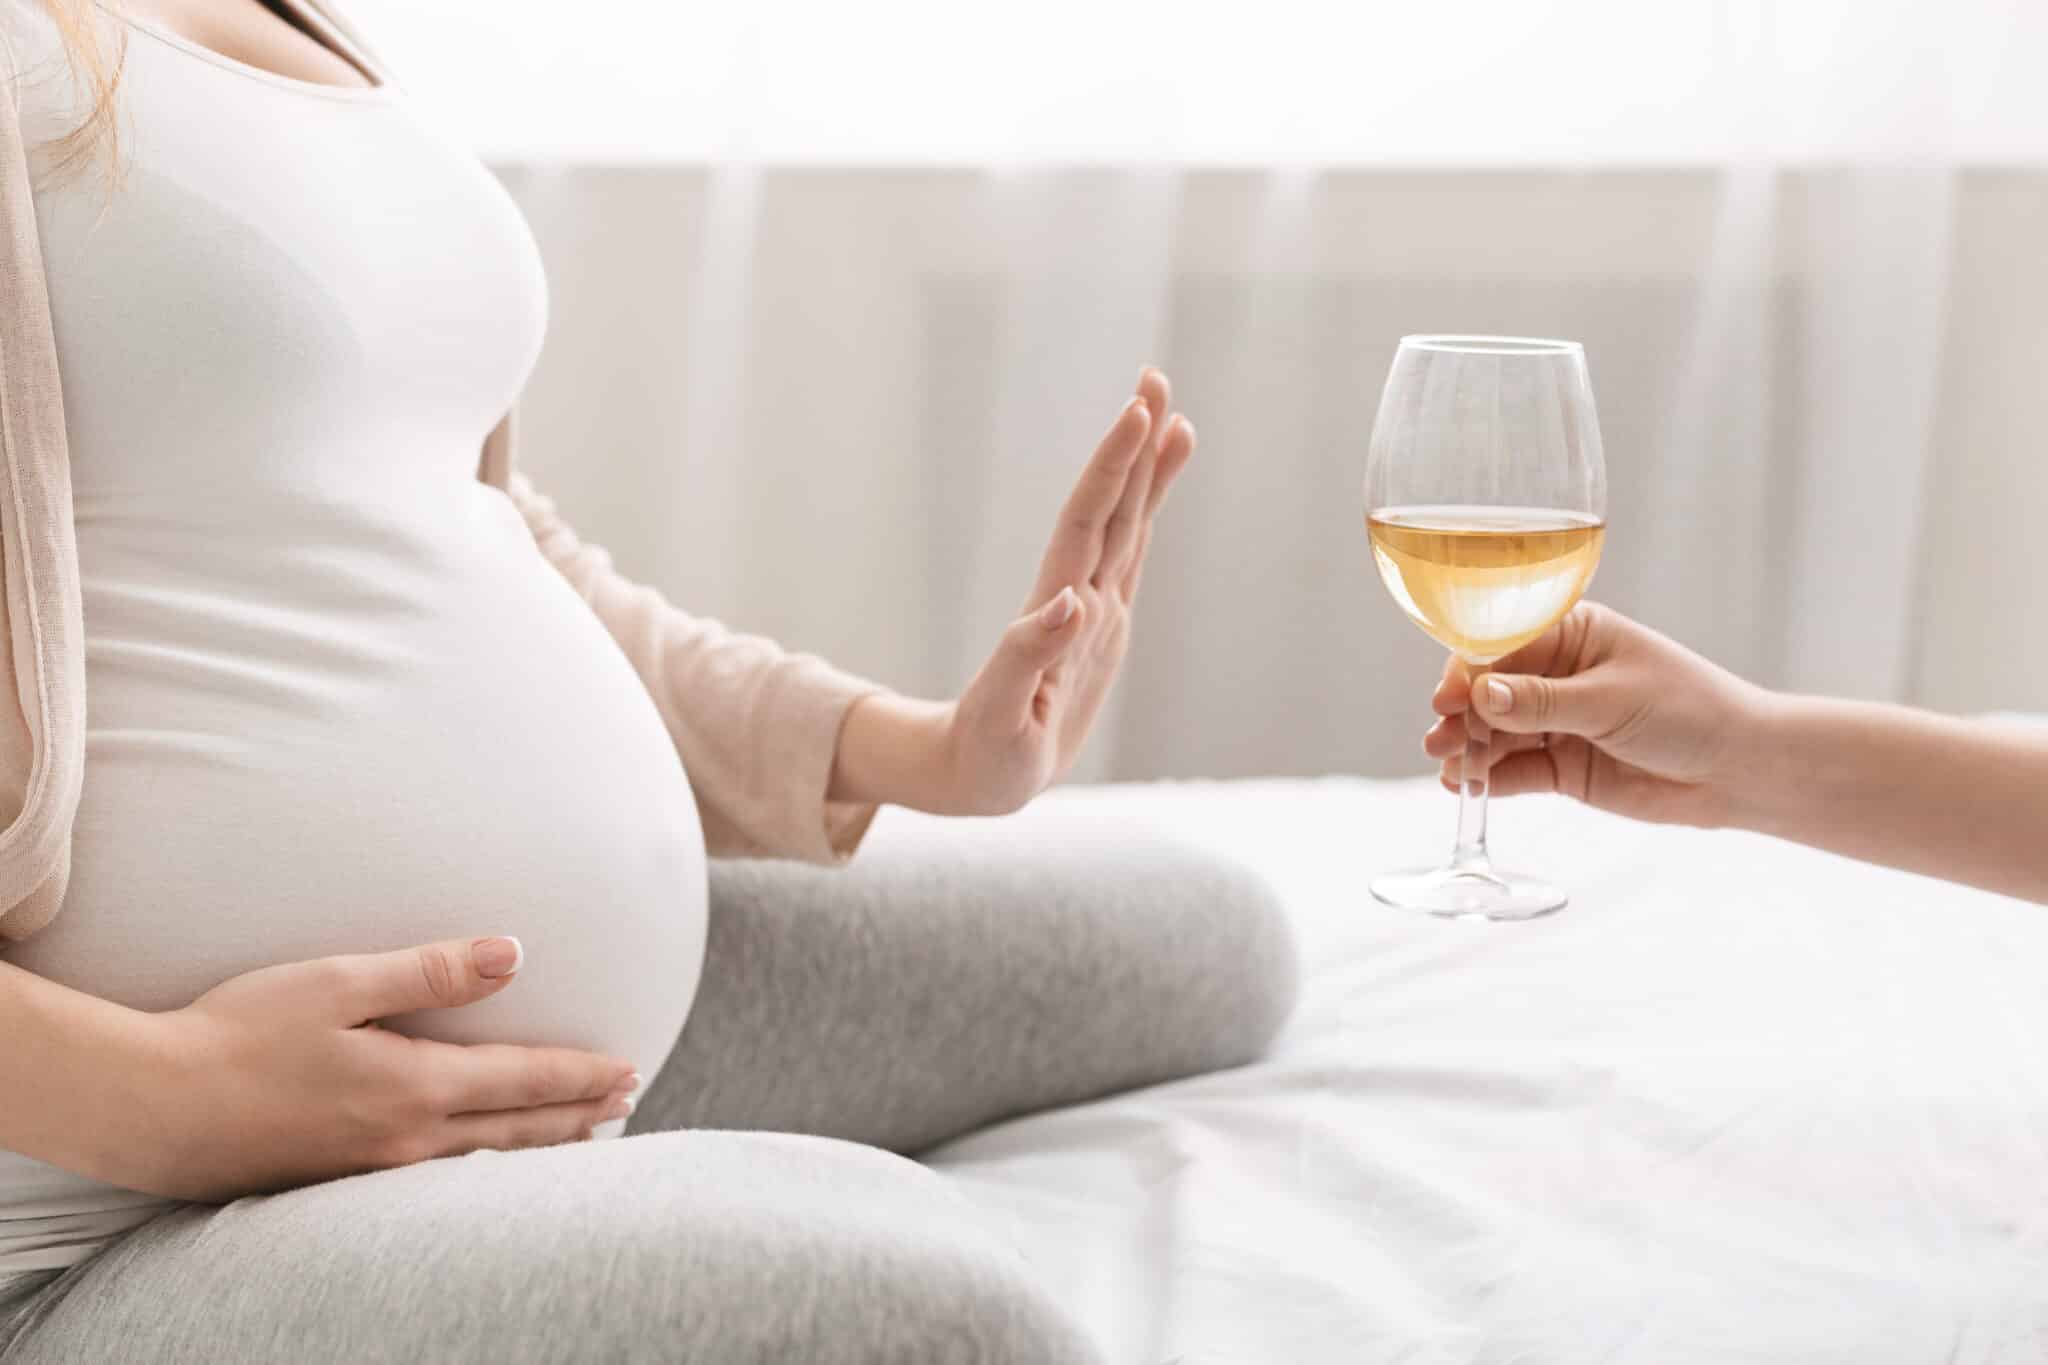 Can You Detox While Pregnant?